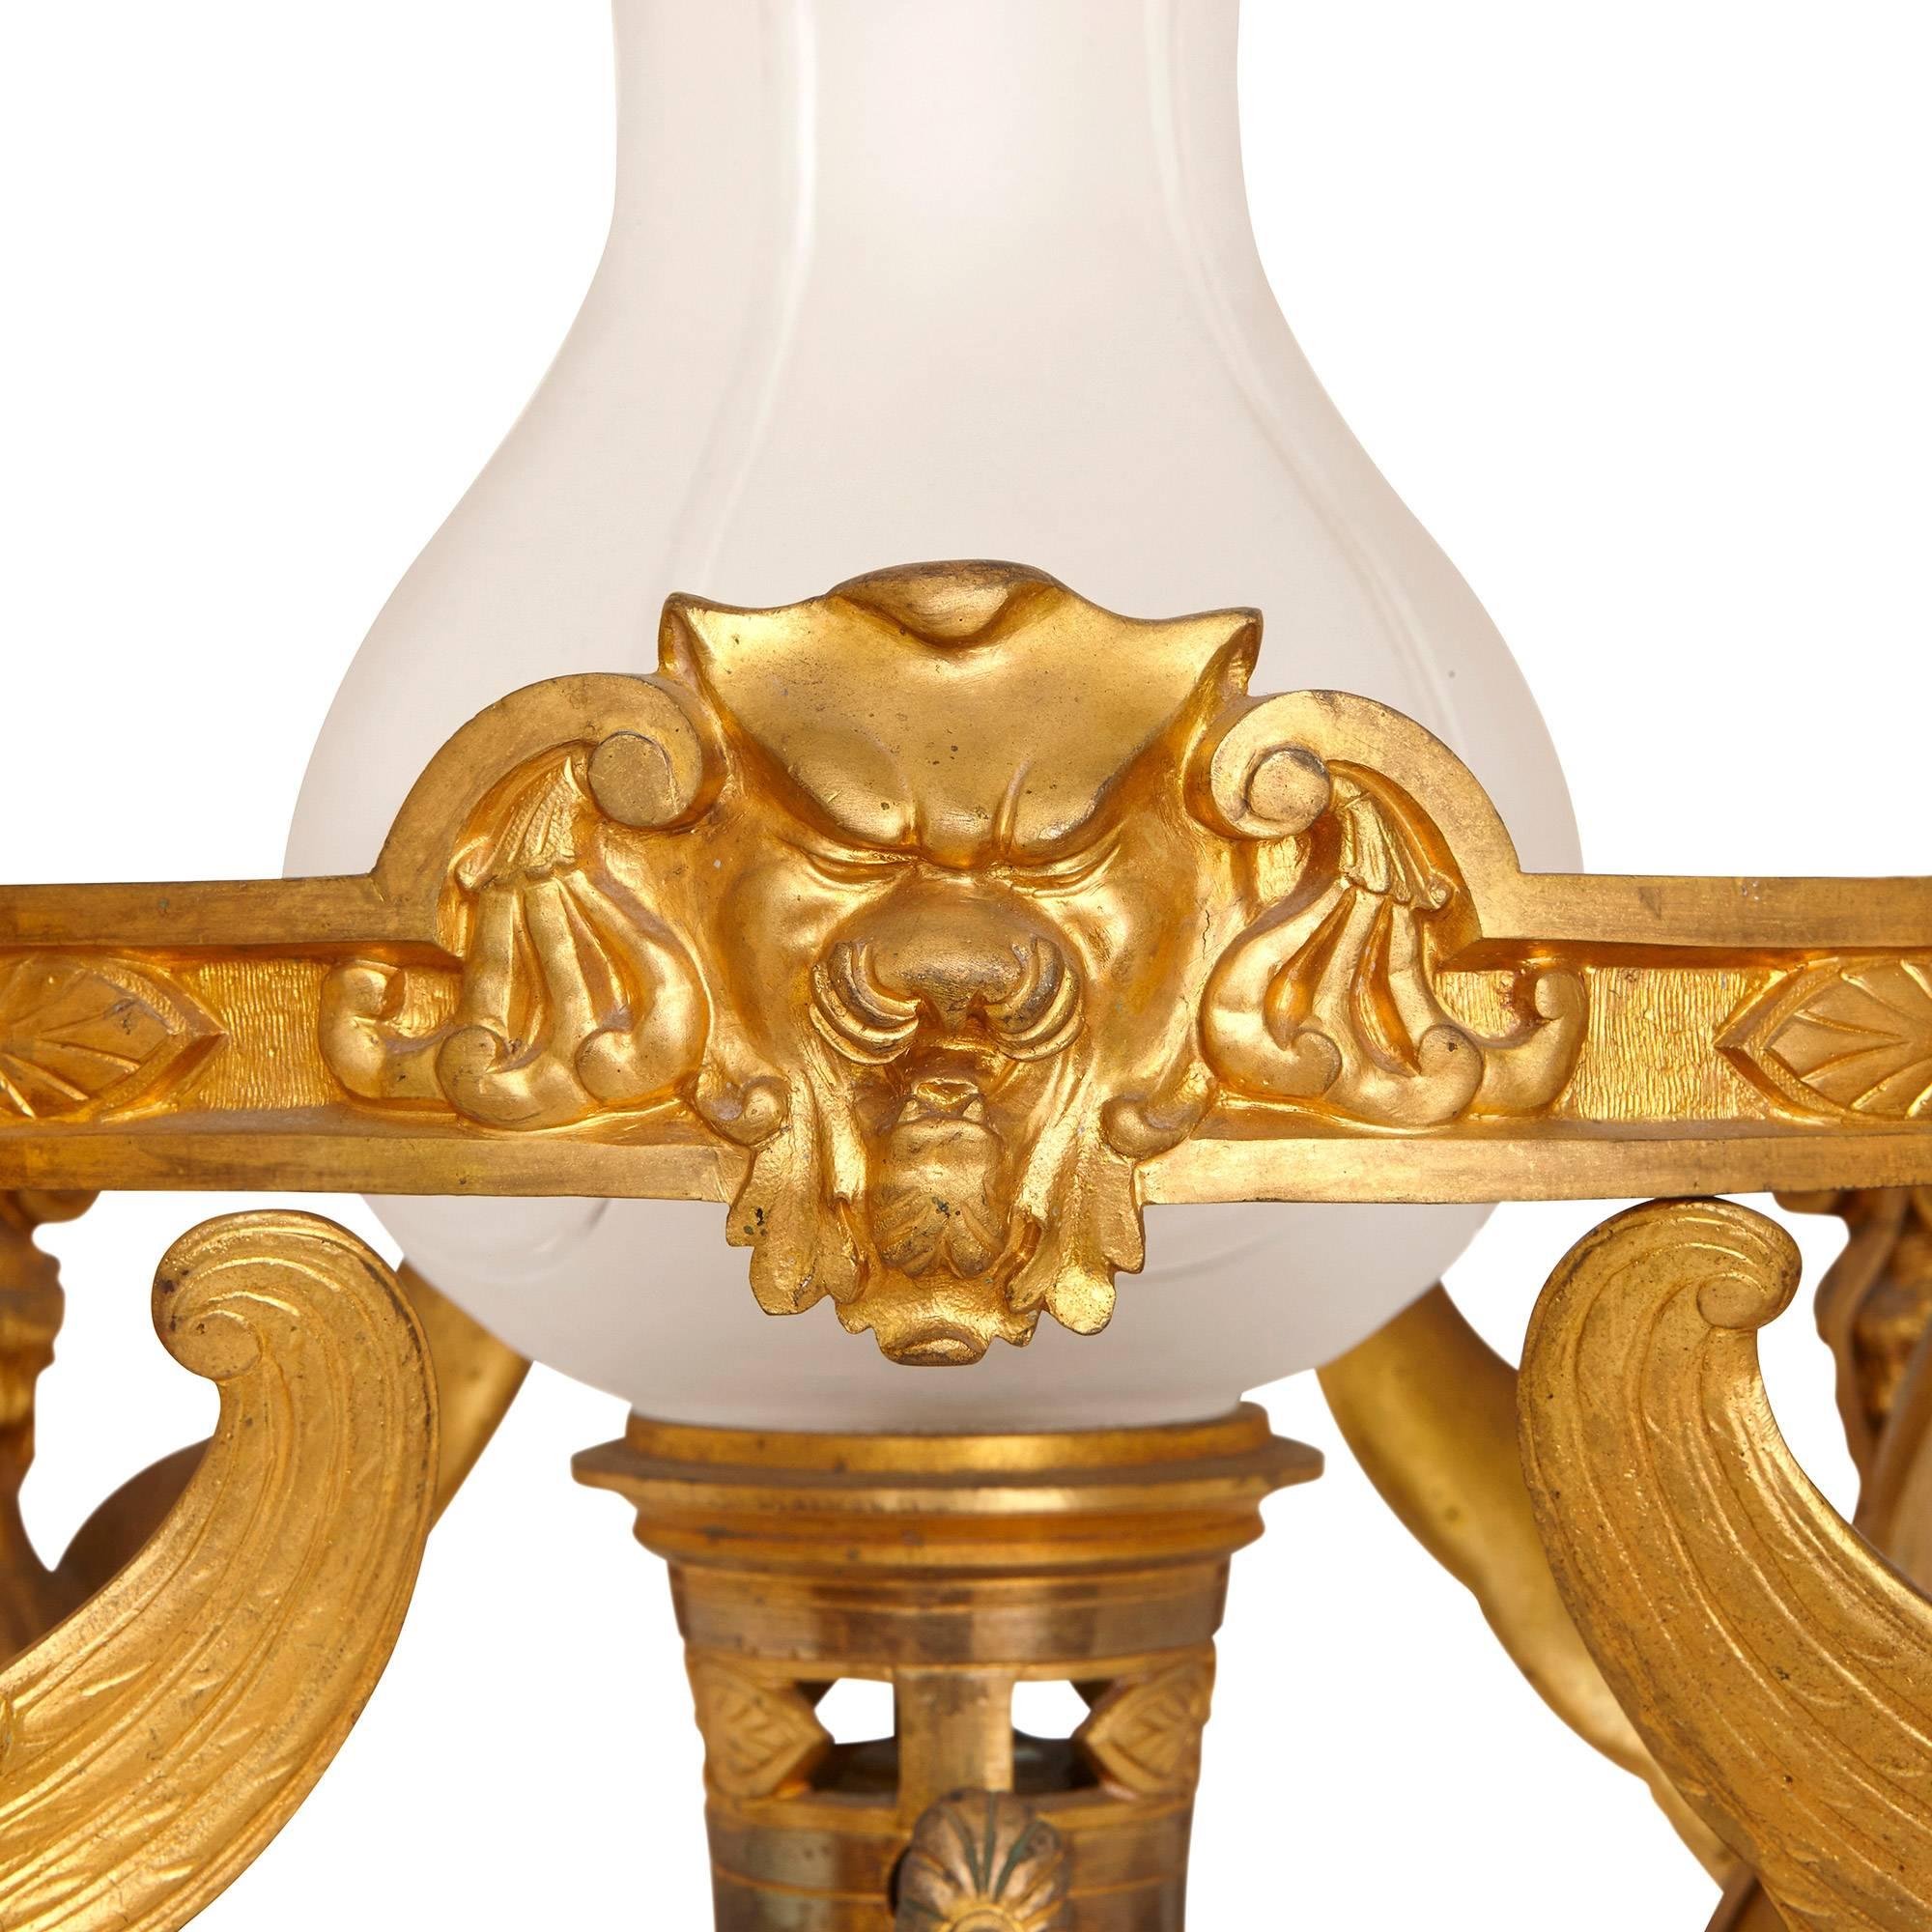 This beautiful antique French chandelier dates from the 19th Century and could be attributed to the master bronzier Ferdinand Barbedienne. It is cast entirely in gilt bronze, and features Empire style and neo-Grec ornamentation all over. The base of